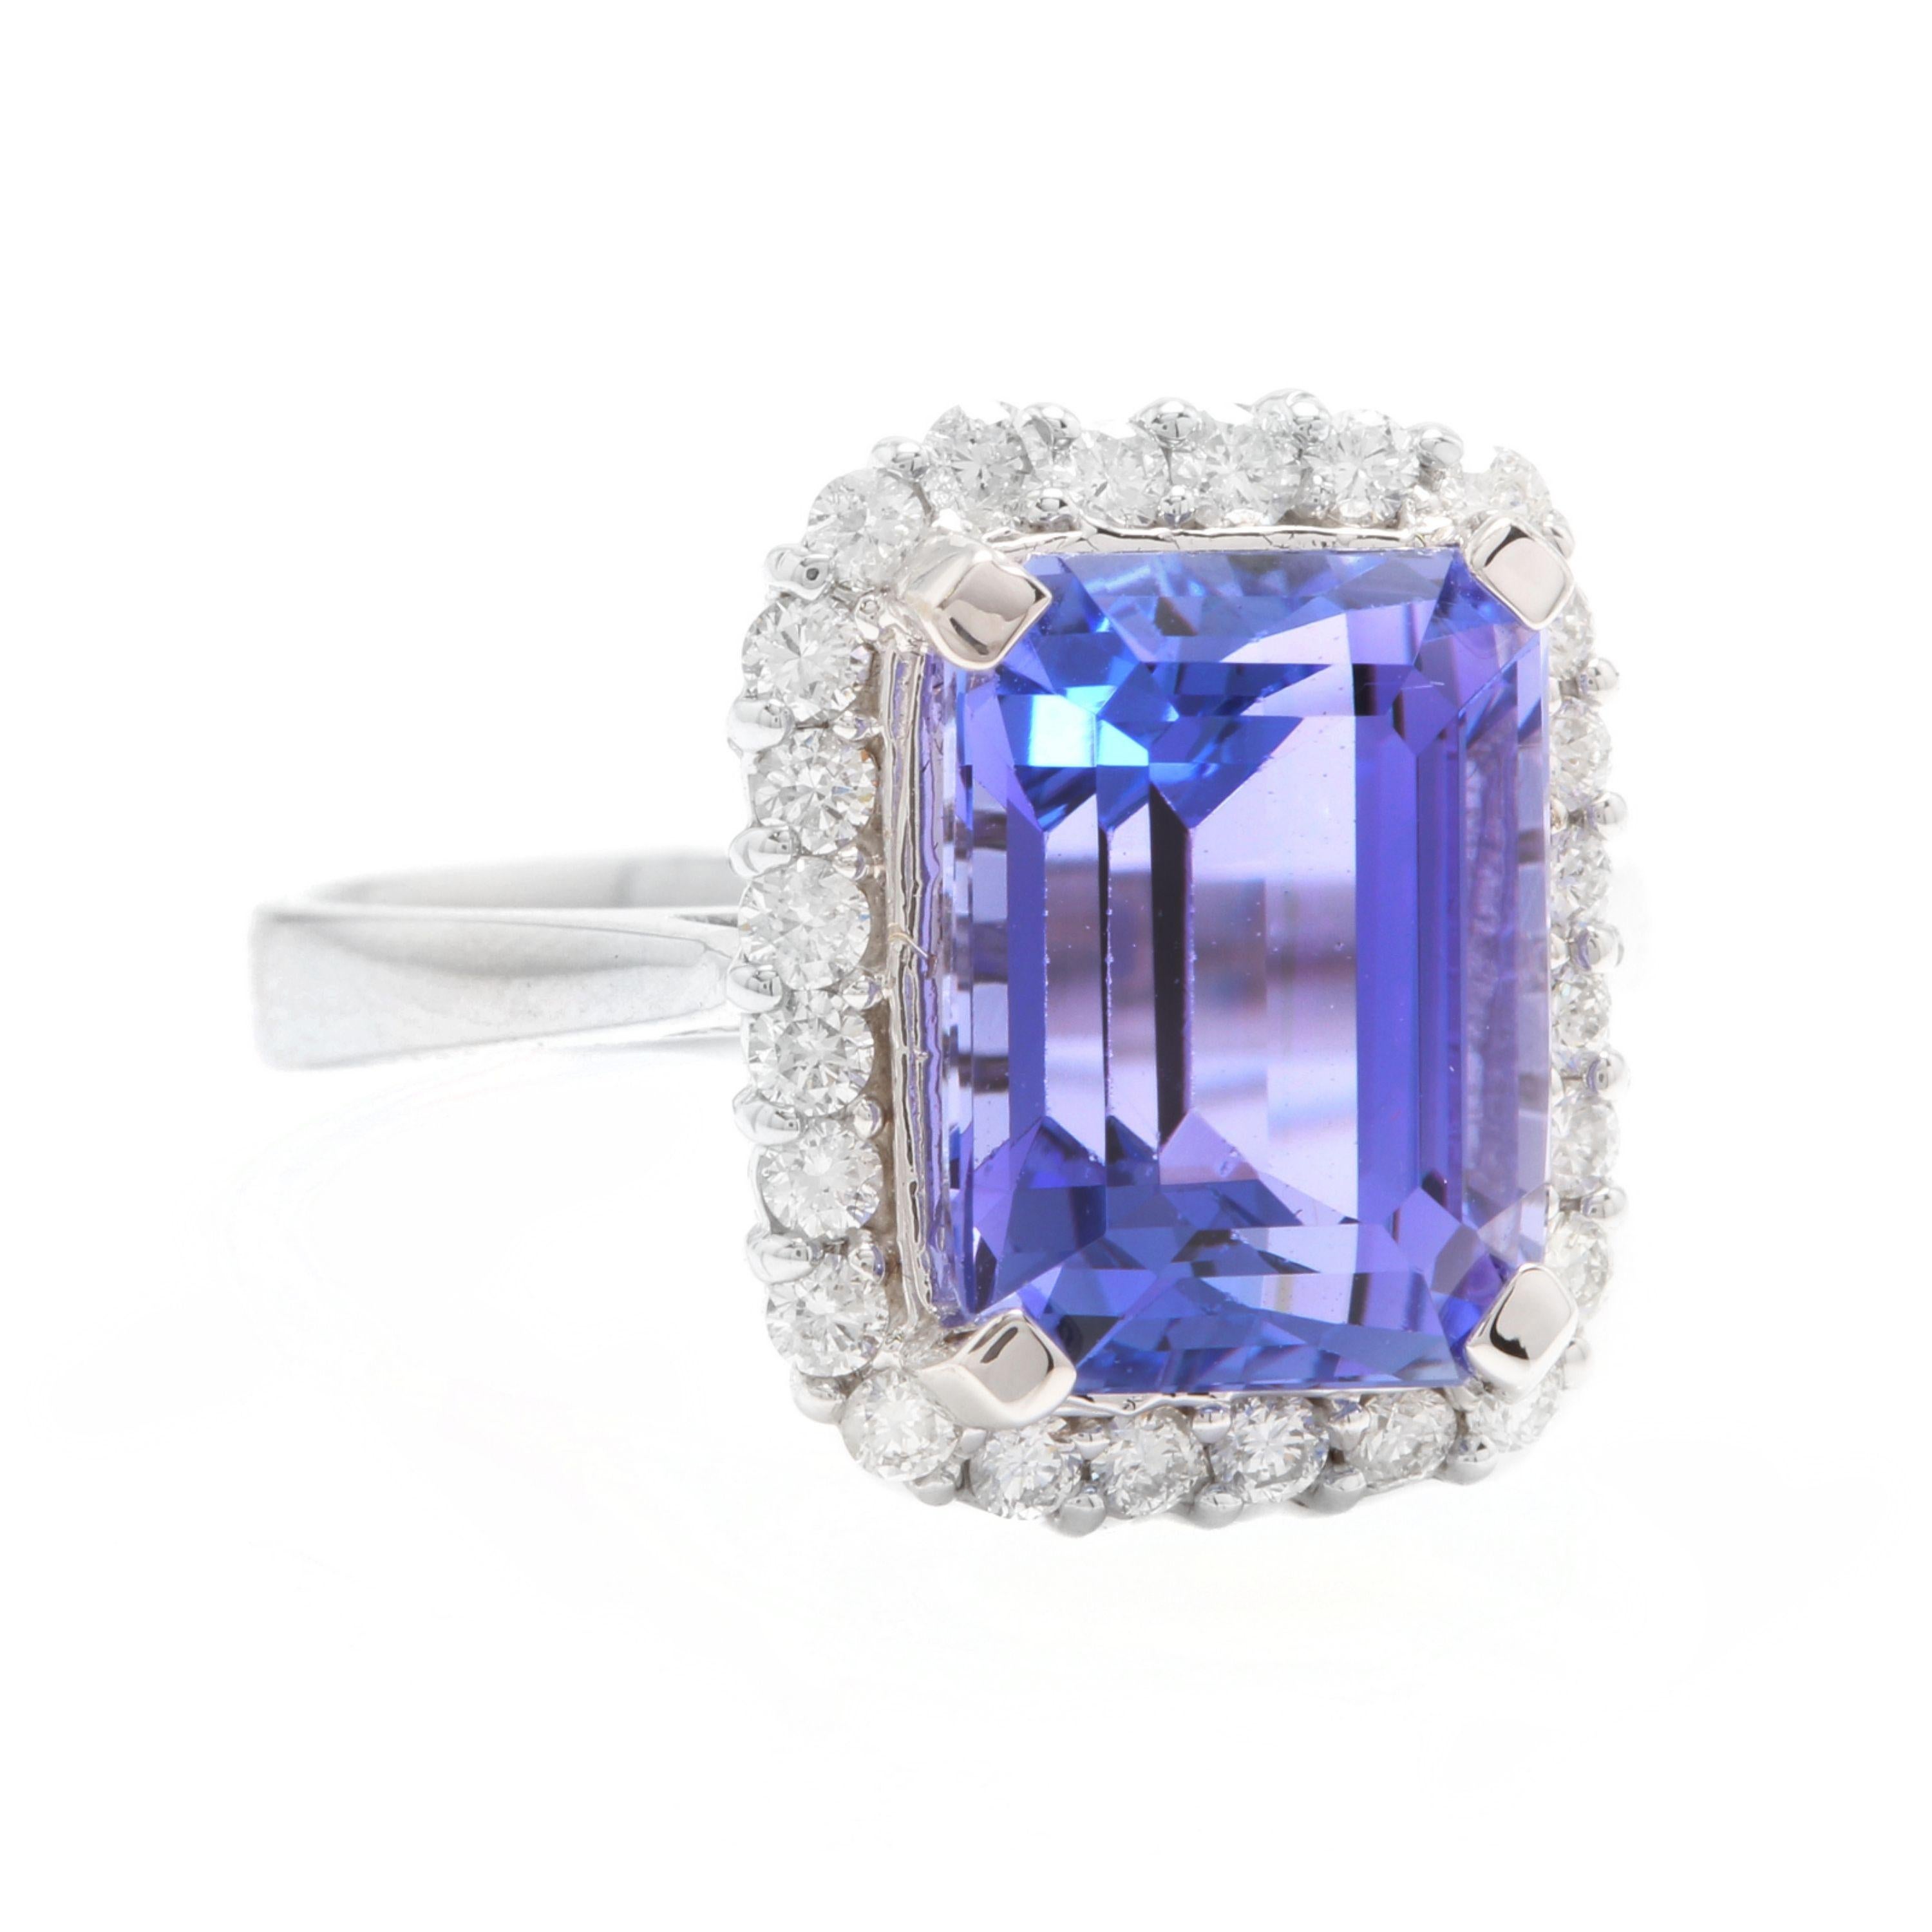 6.45 Carats Natural Very Nice Looking Tanzanite and Diamond 14K Solid White Gold Ring

Total Natural Emerald Cut Tanzanite Weight is: Approx. 6.00 Carats

Tanzanite Measures: Approx. 11.25 x 8.50mm

Natural Round Diamonds Weight: Approx. 0.45 Carats